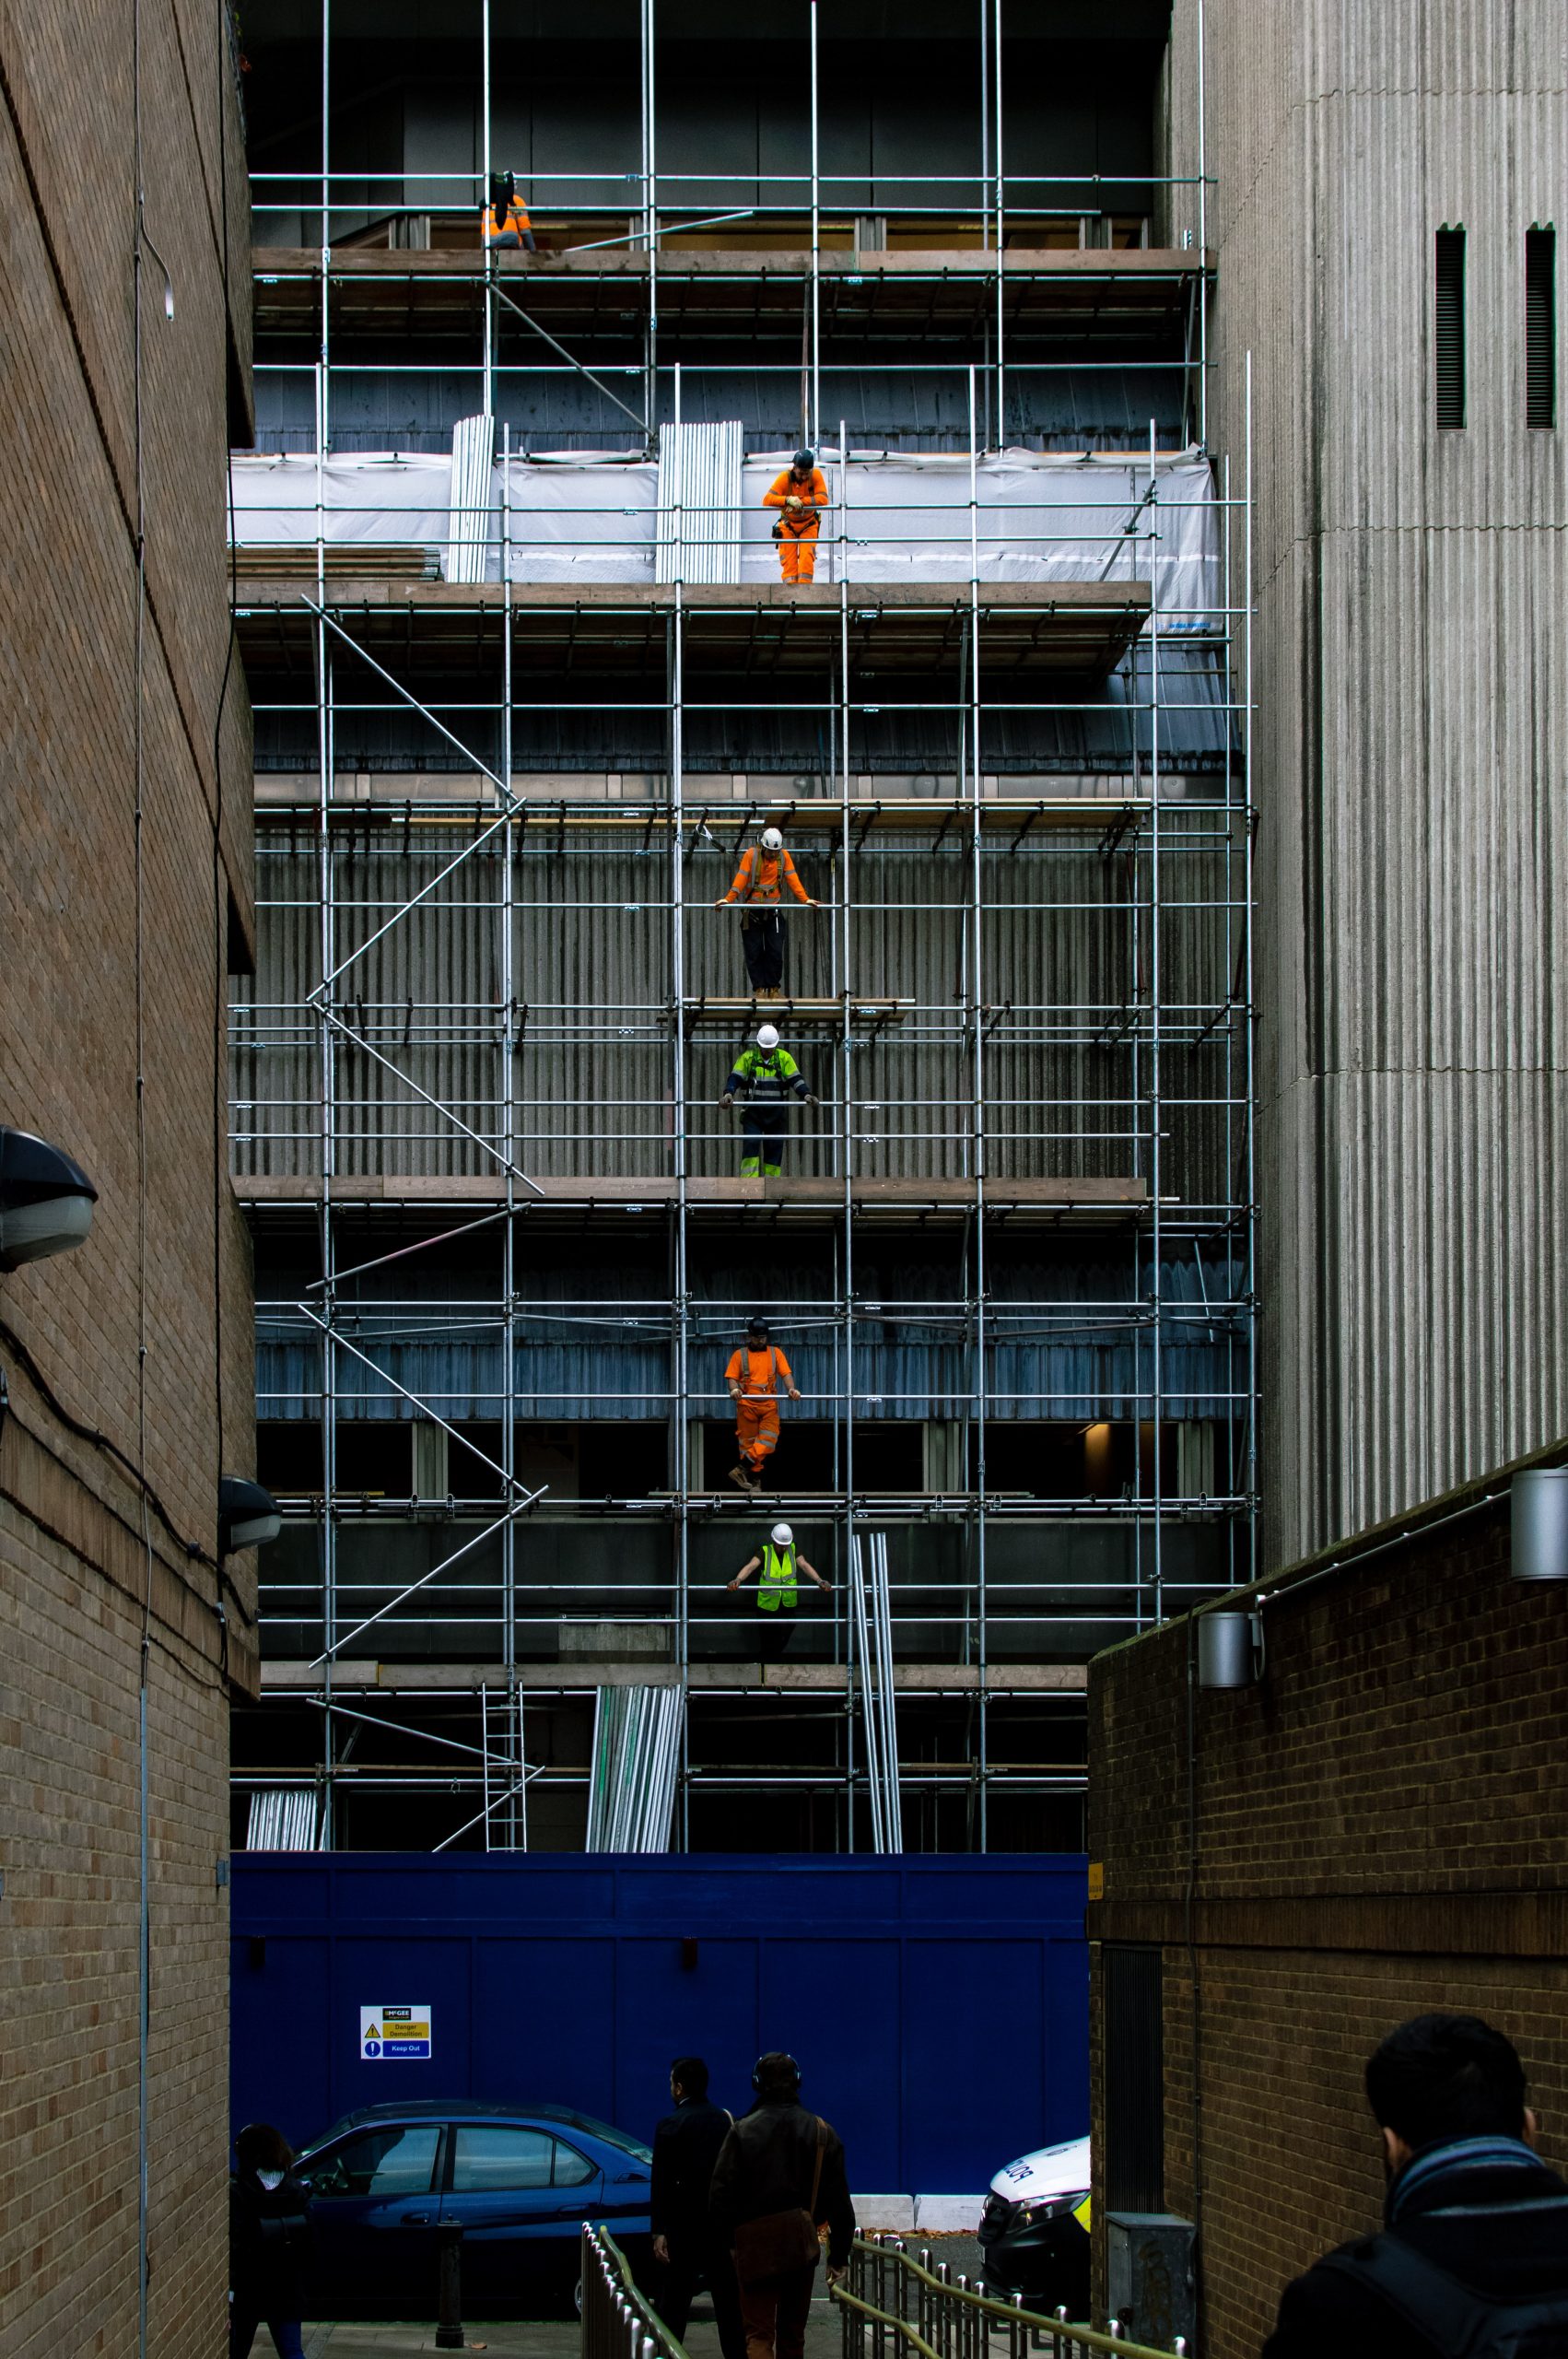 Image of builders lined up on scaffolding on a city building. The workers are outdoors, and vulnerable to extreme heat.